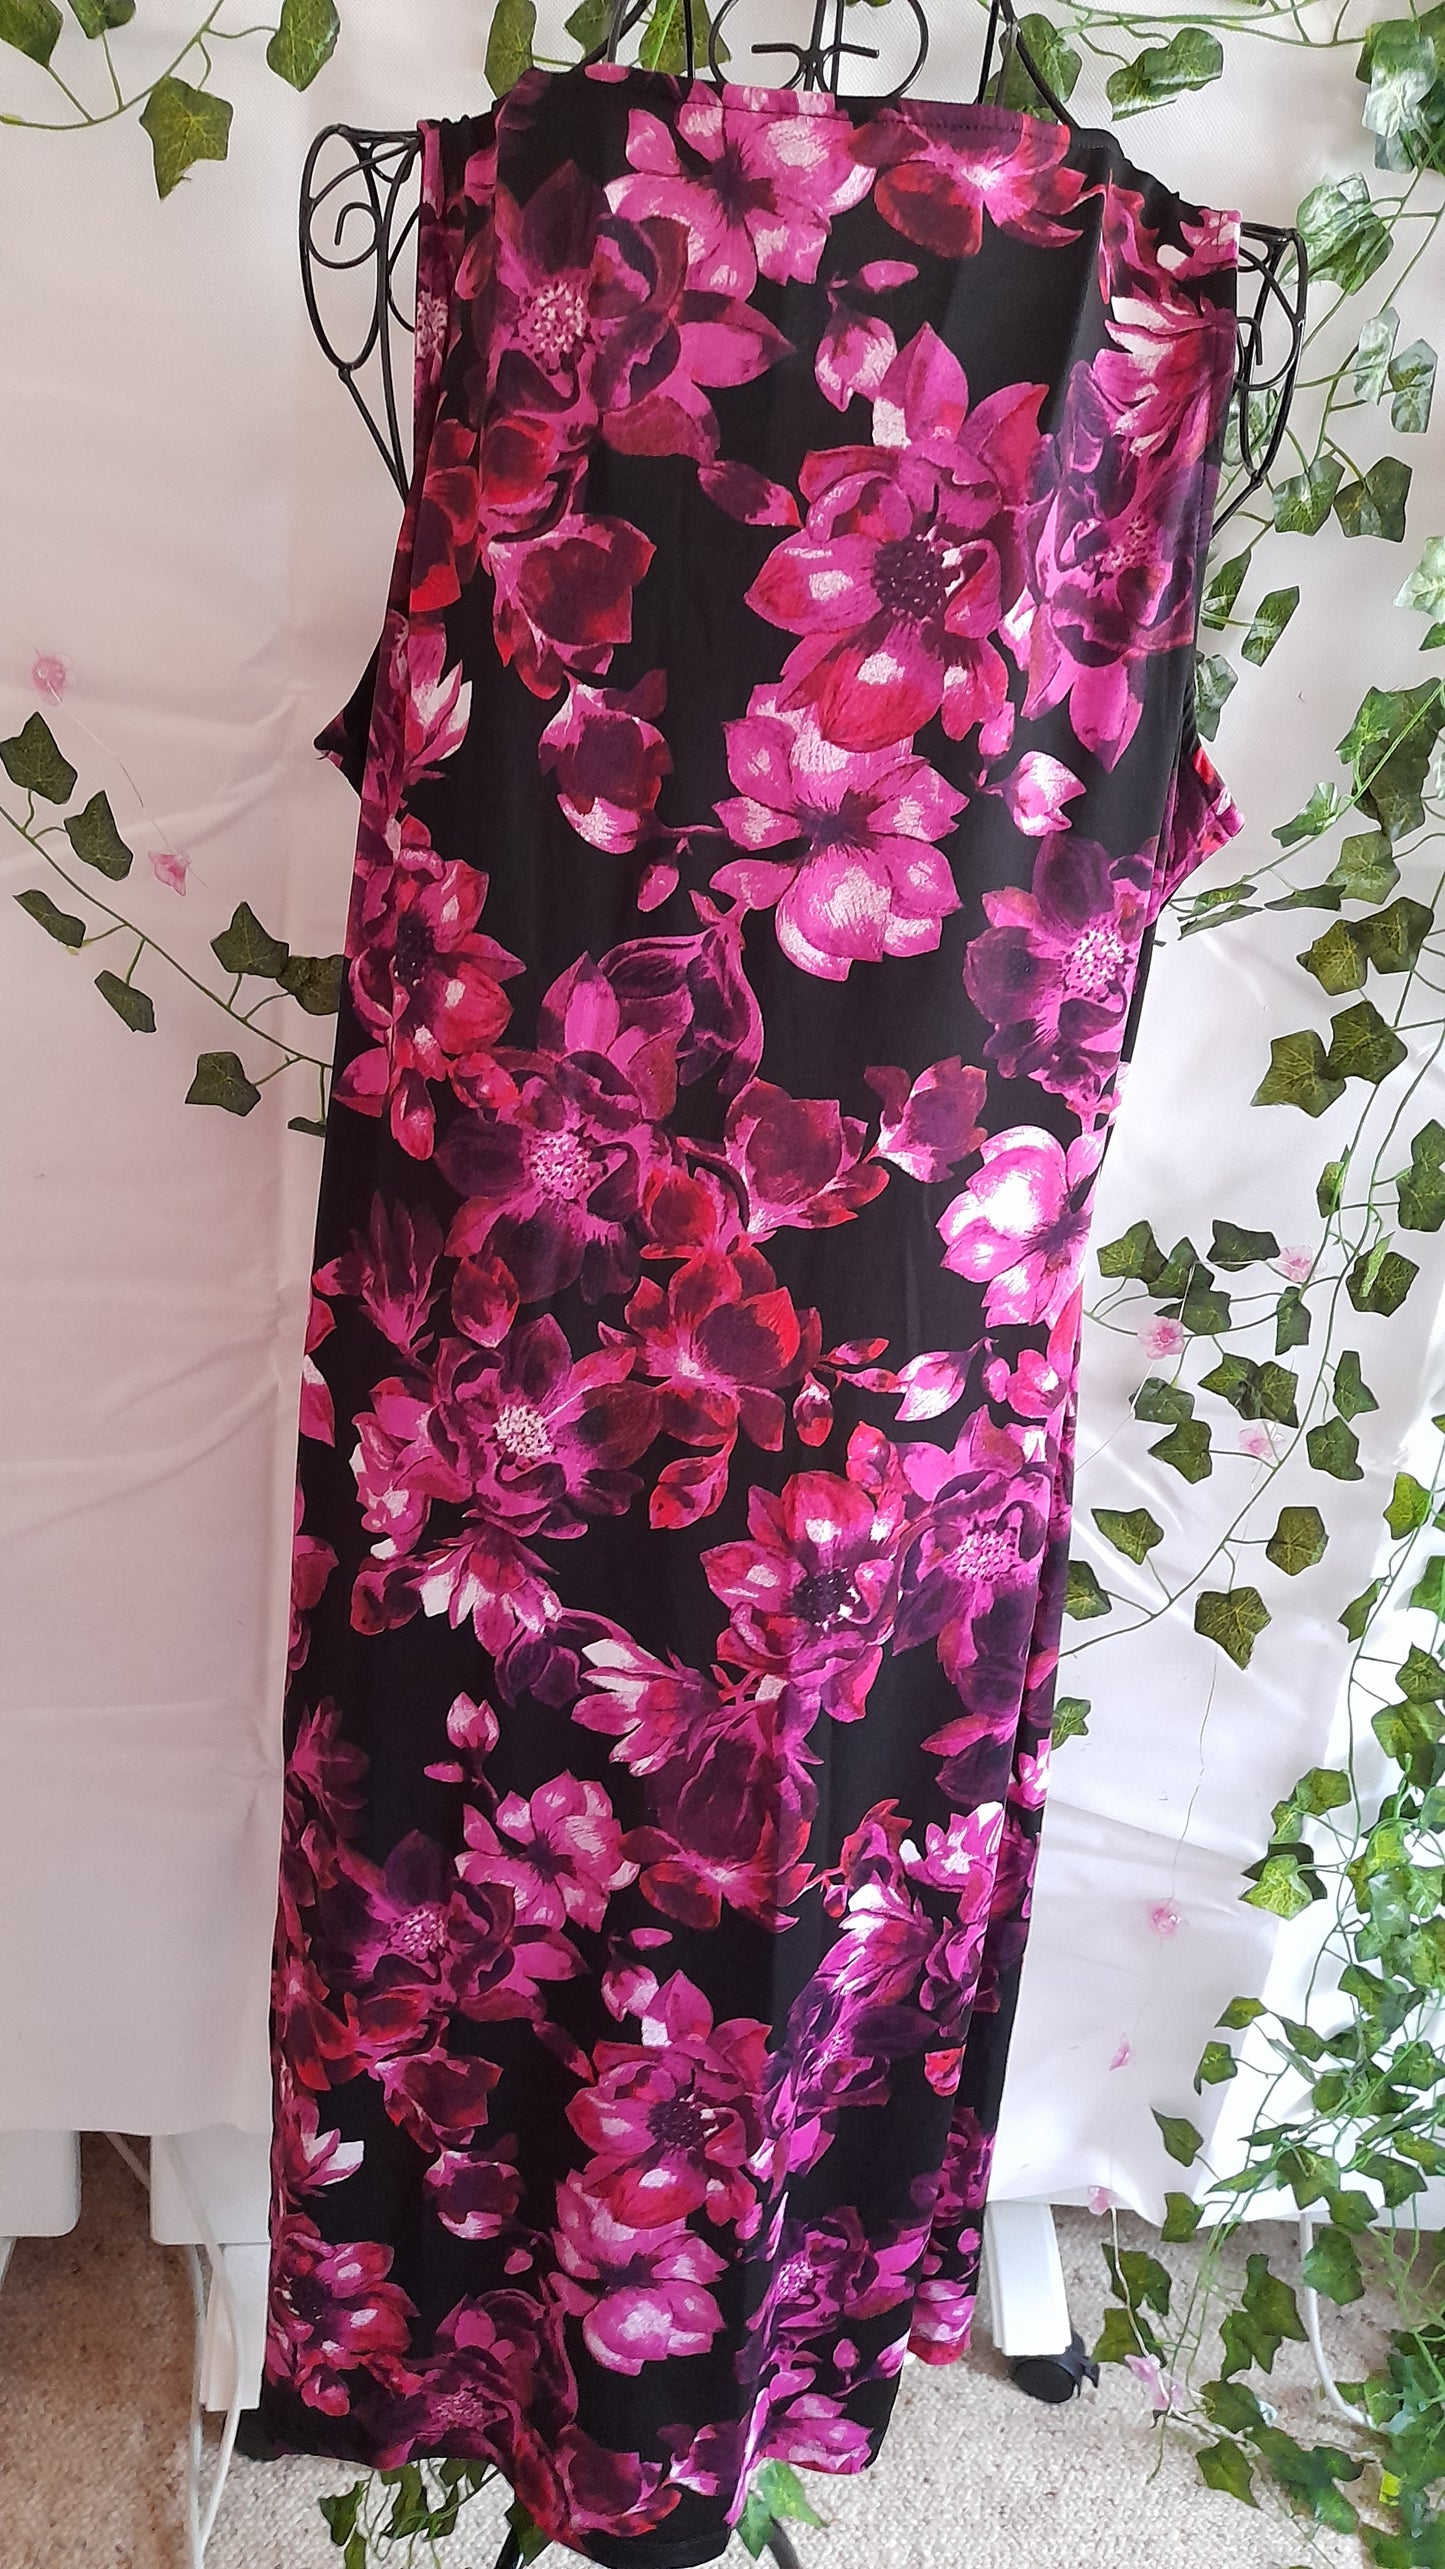 Dress - Millers Orchid Print Casual Size M/14